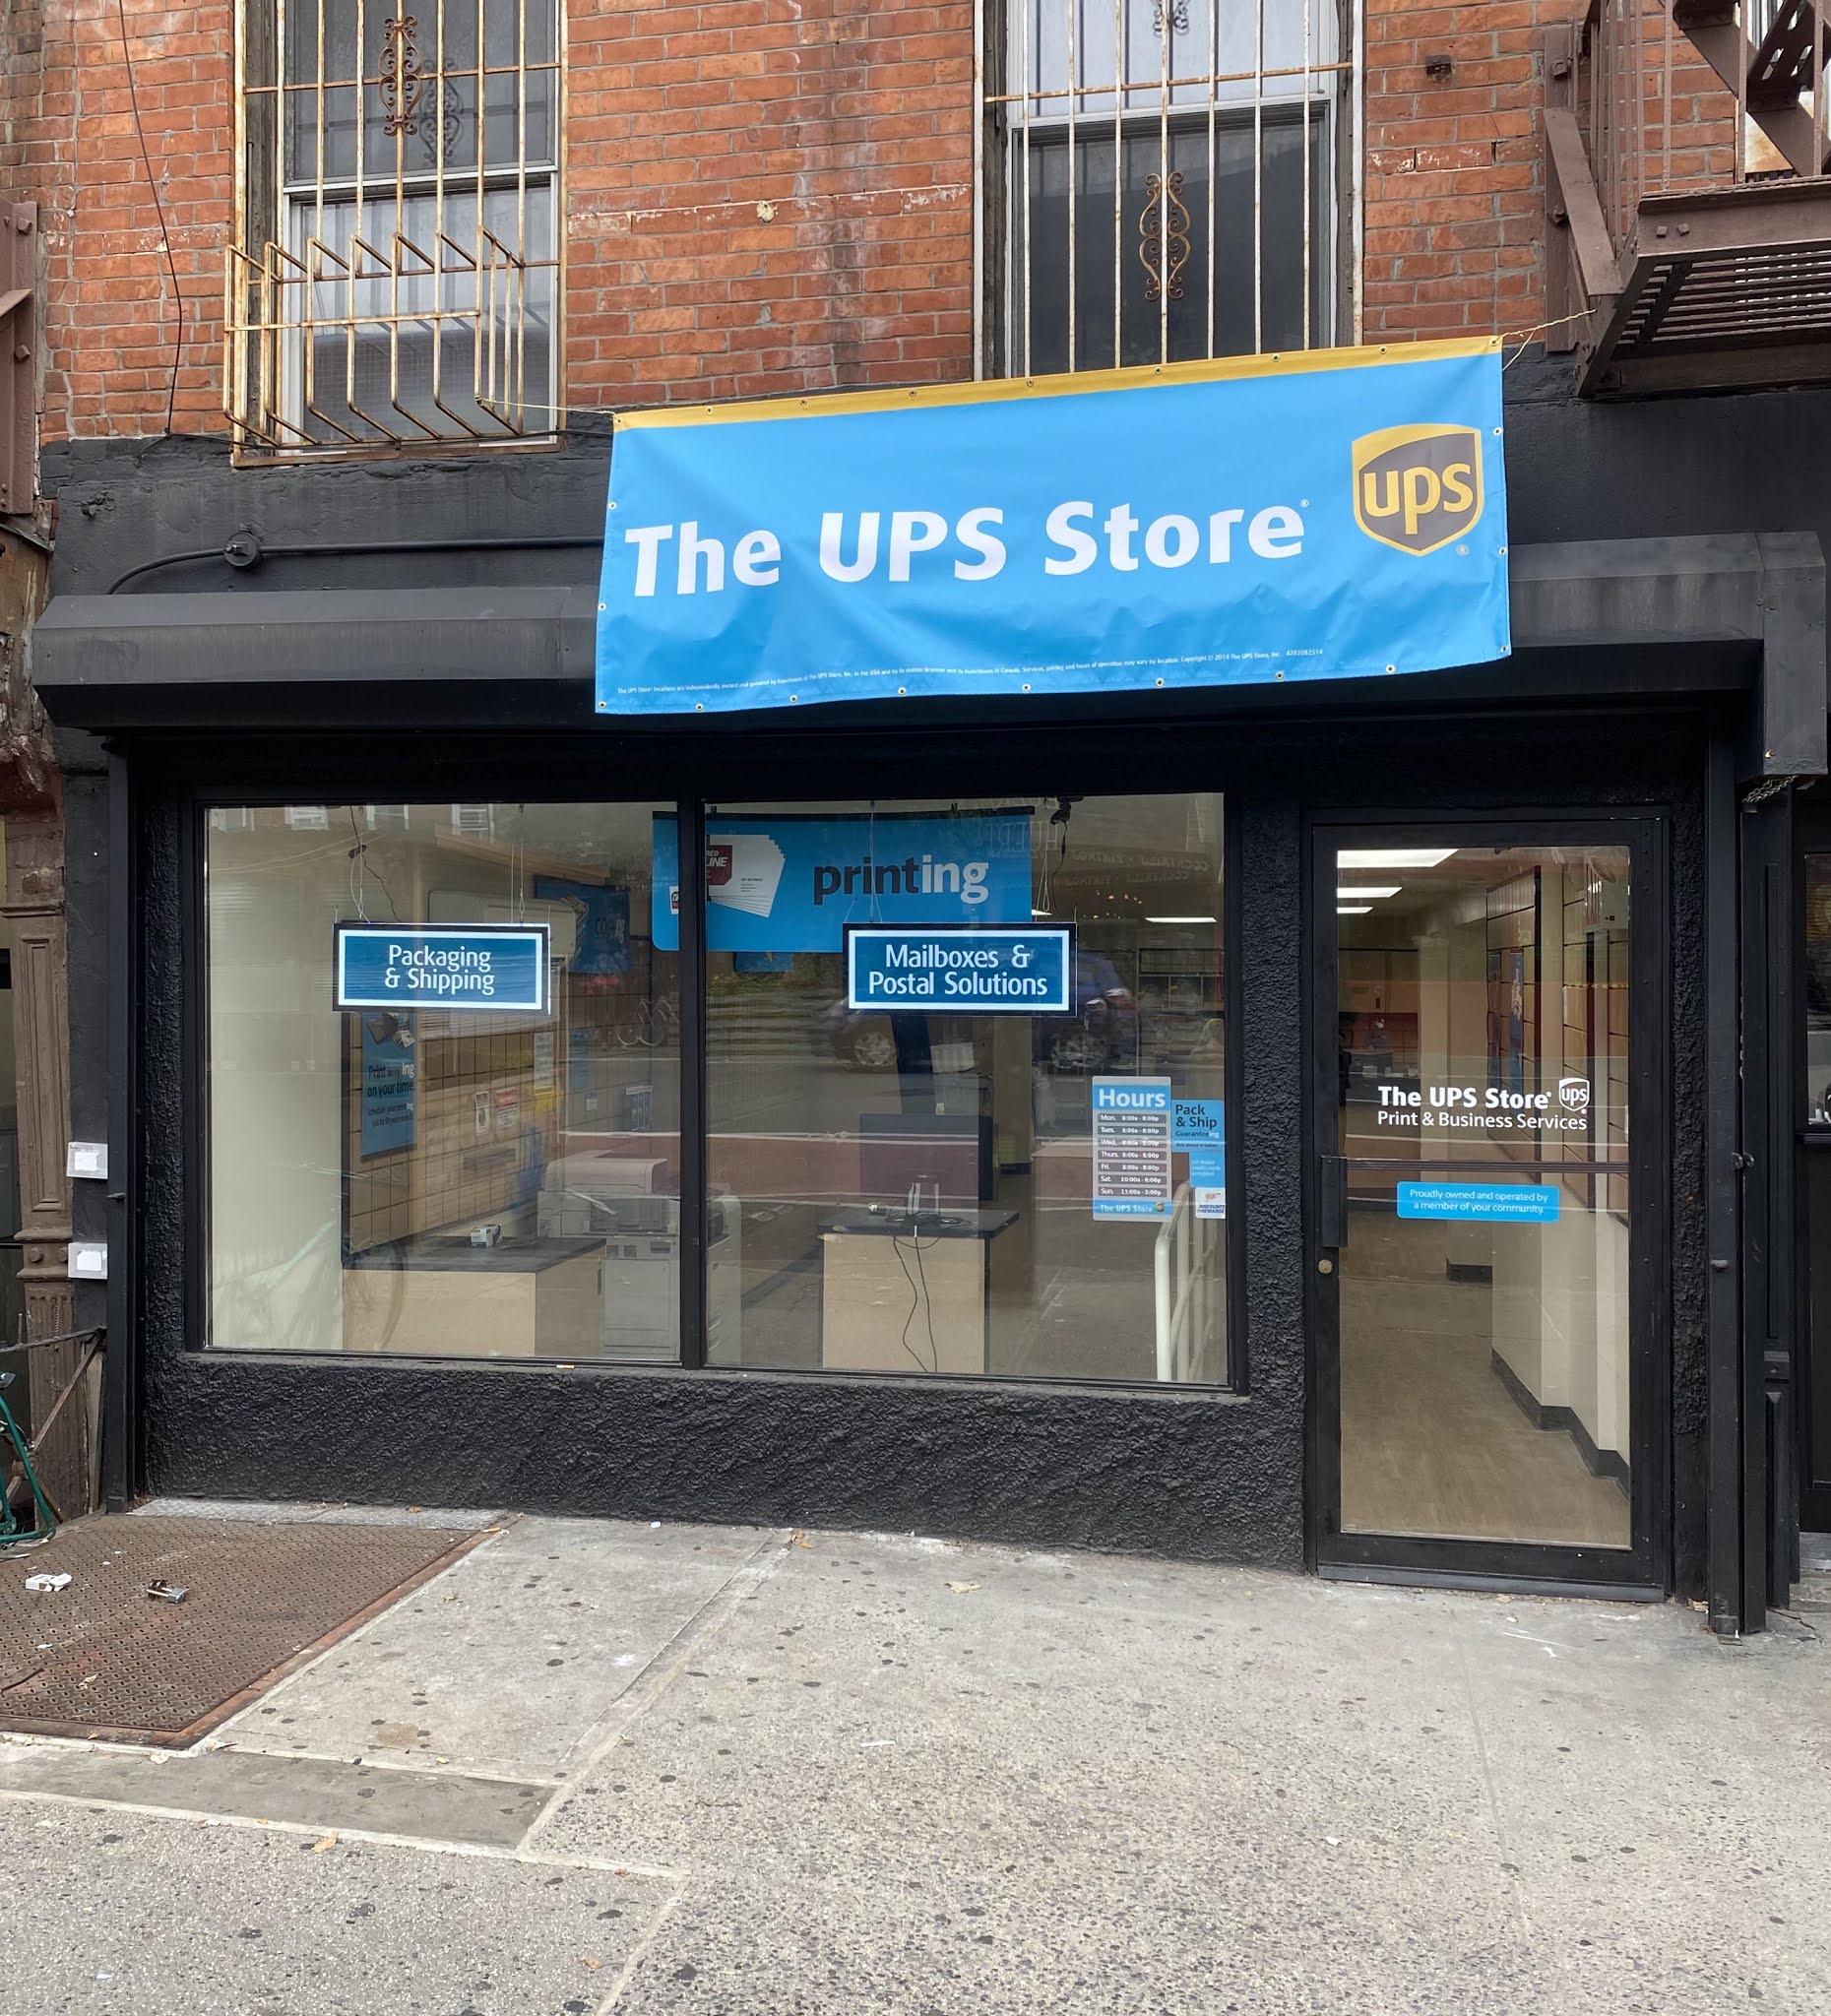 EV Grieve: The UPS Store delivers a grand opening on 1st Avenue is ups store open on sunday